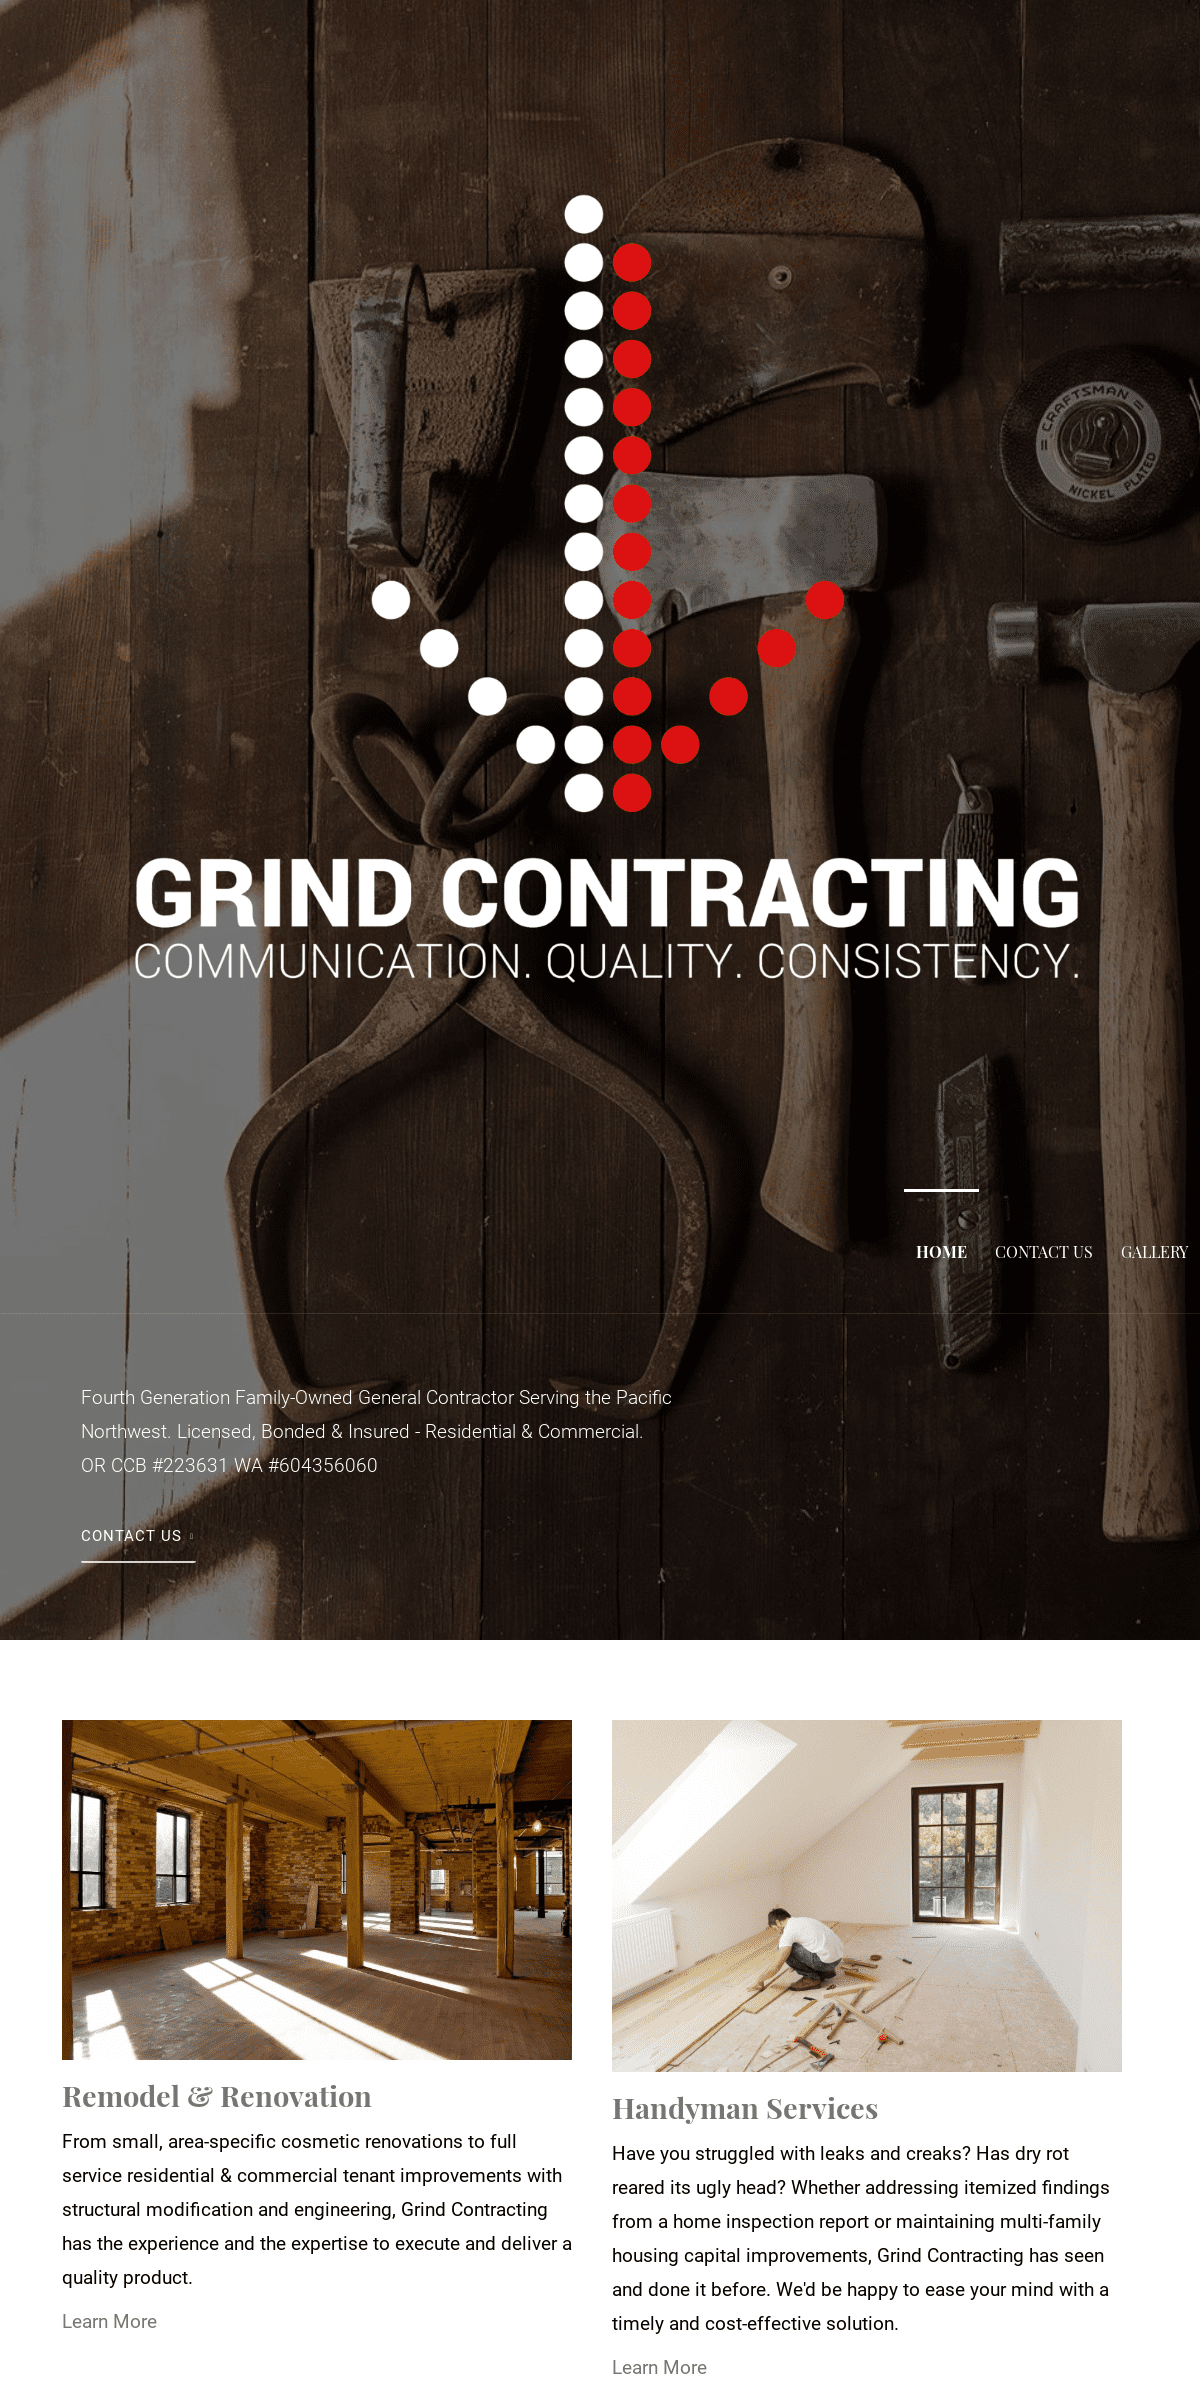 A complete backup of grindcontracting.com